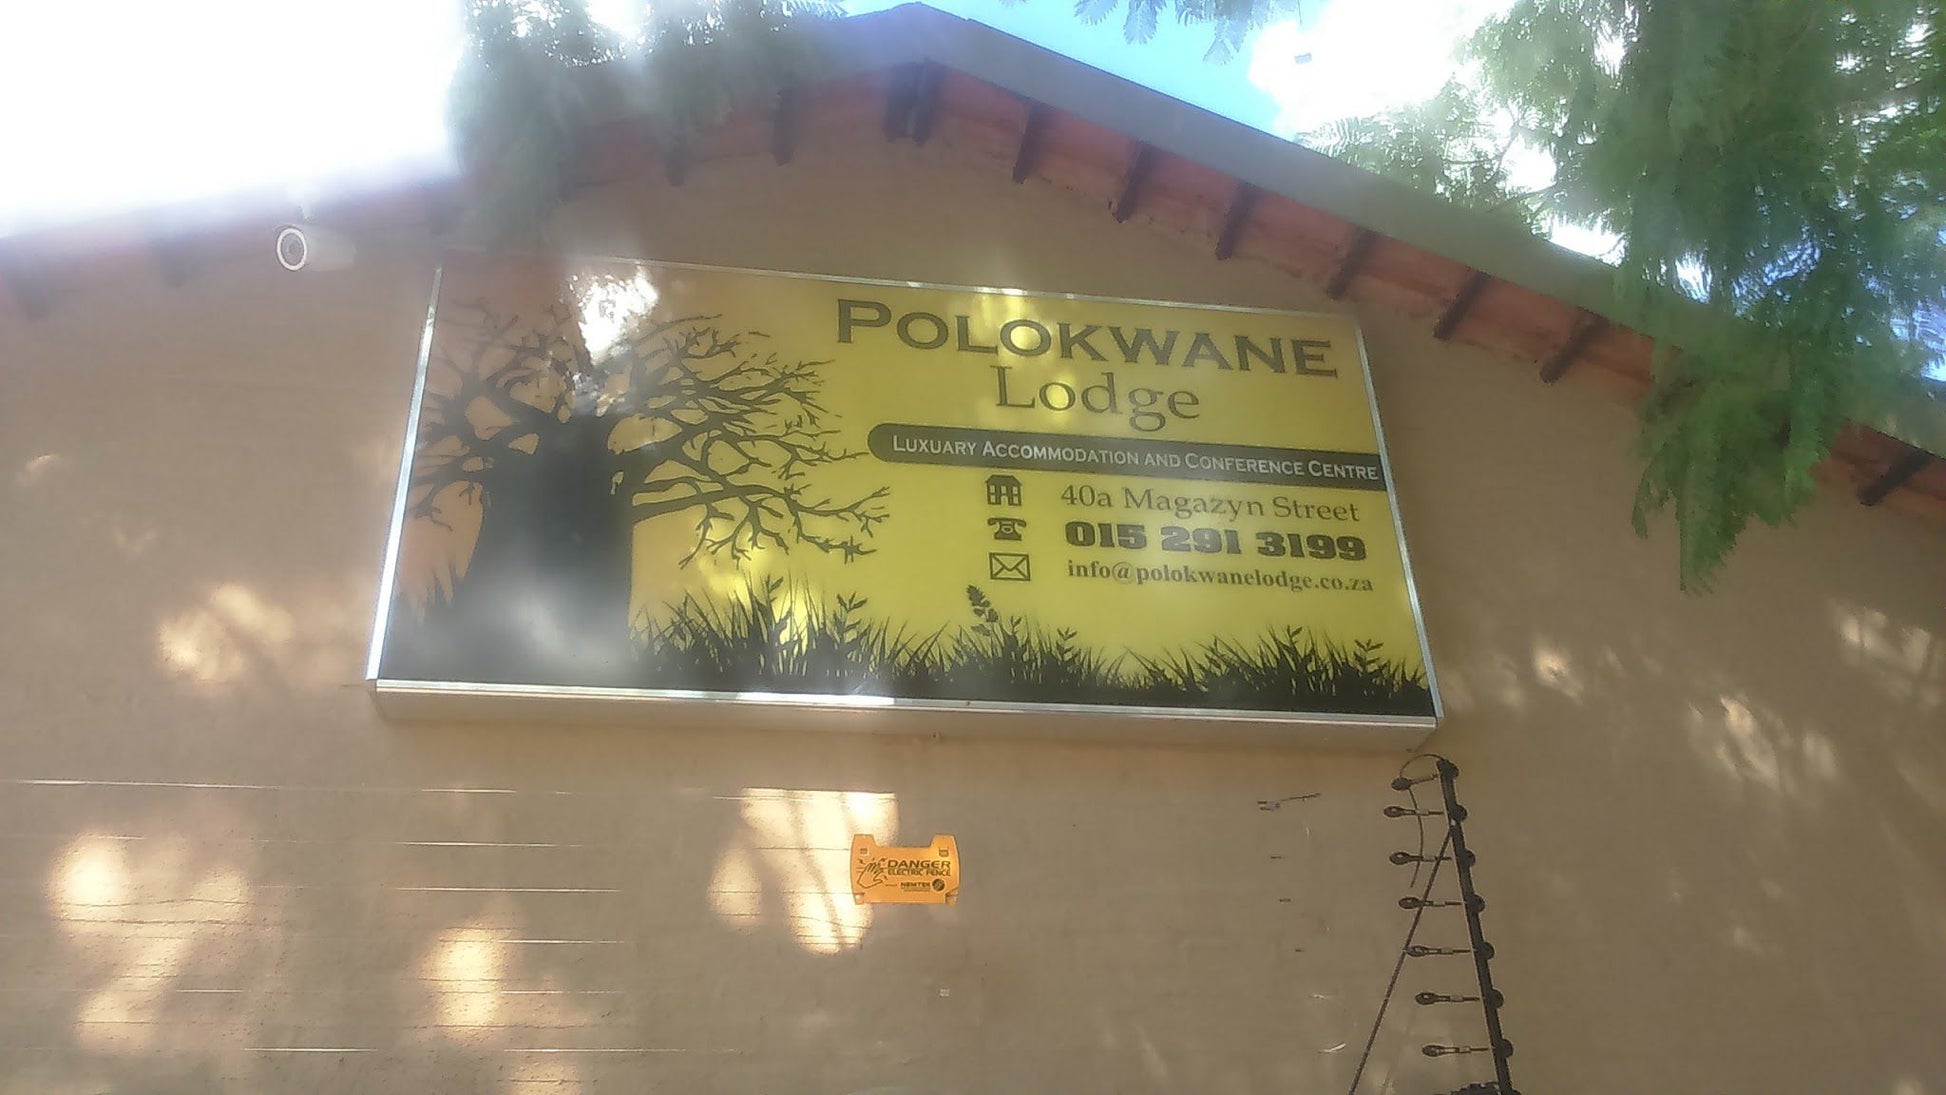 Polokwane Lodge Polokwane Pietersburg Limpopo Province South Africa Sign, Text